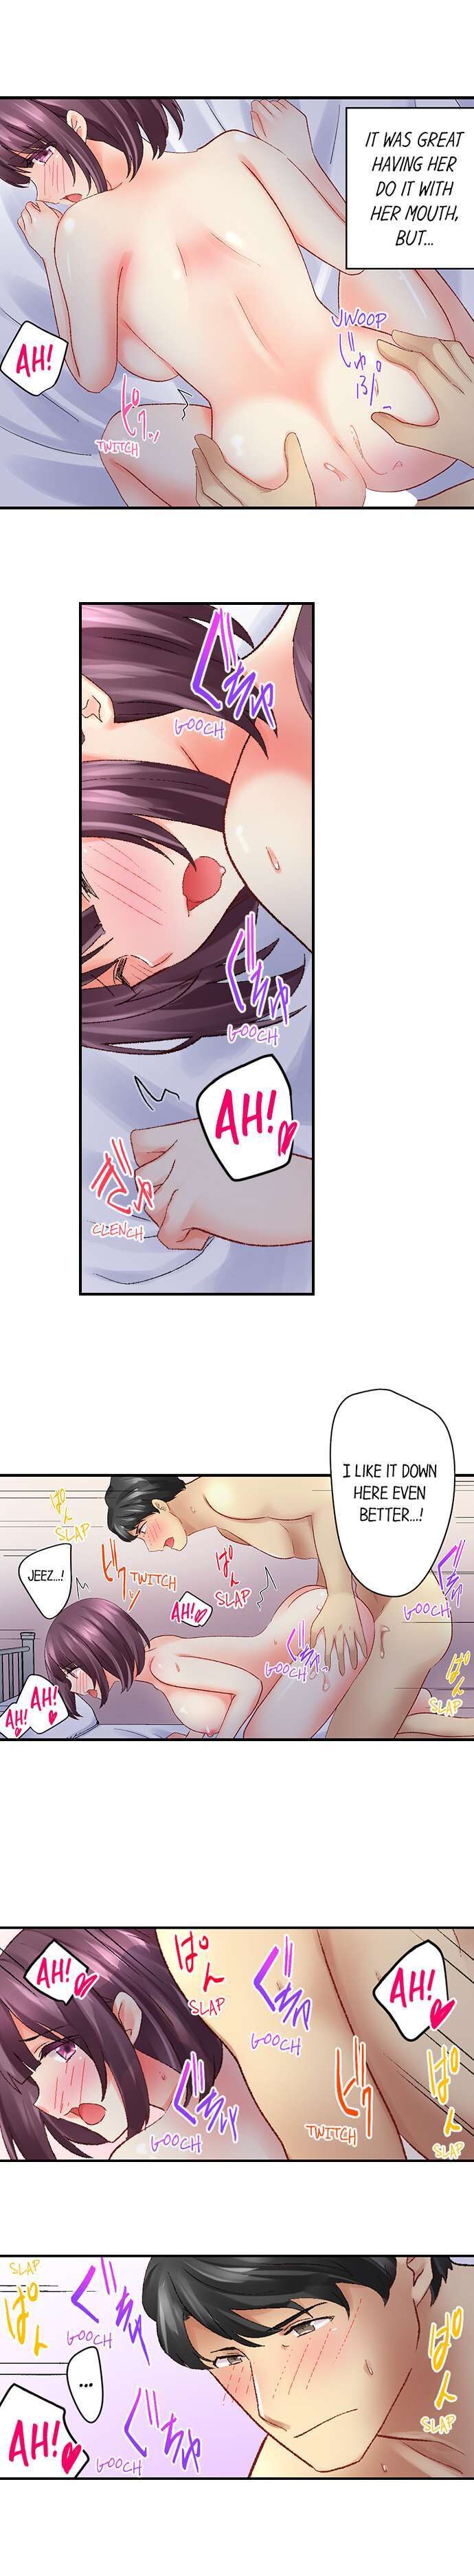 Our Kinky Newlywed Life - Chapter 33 Page 2